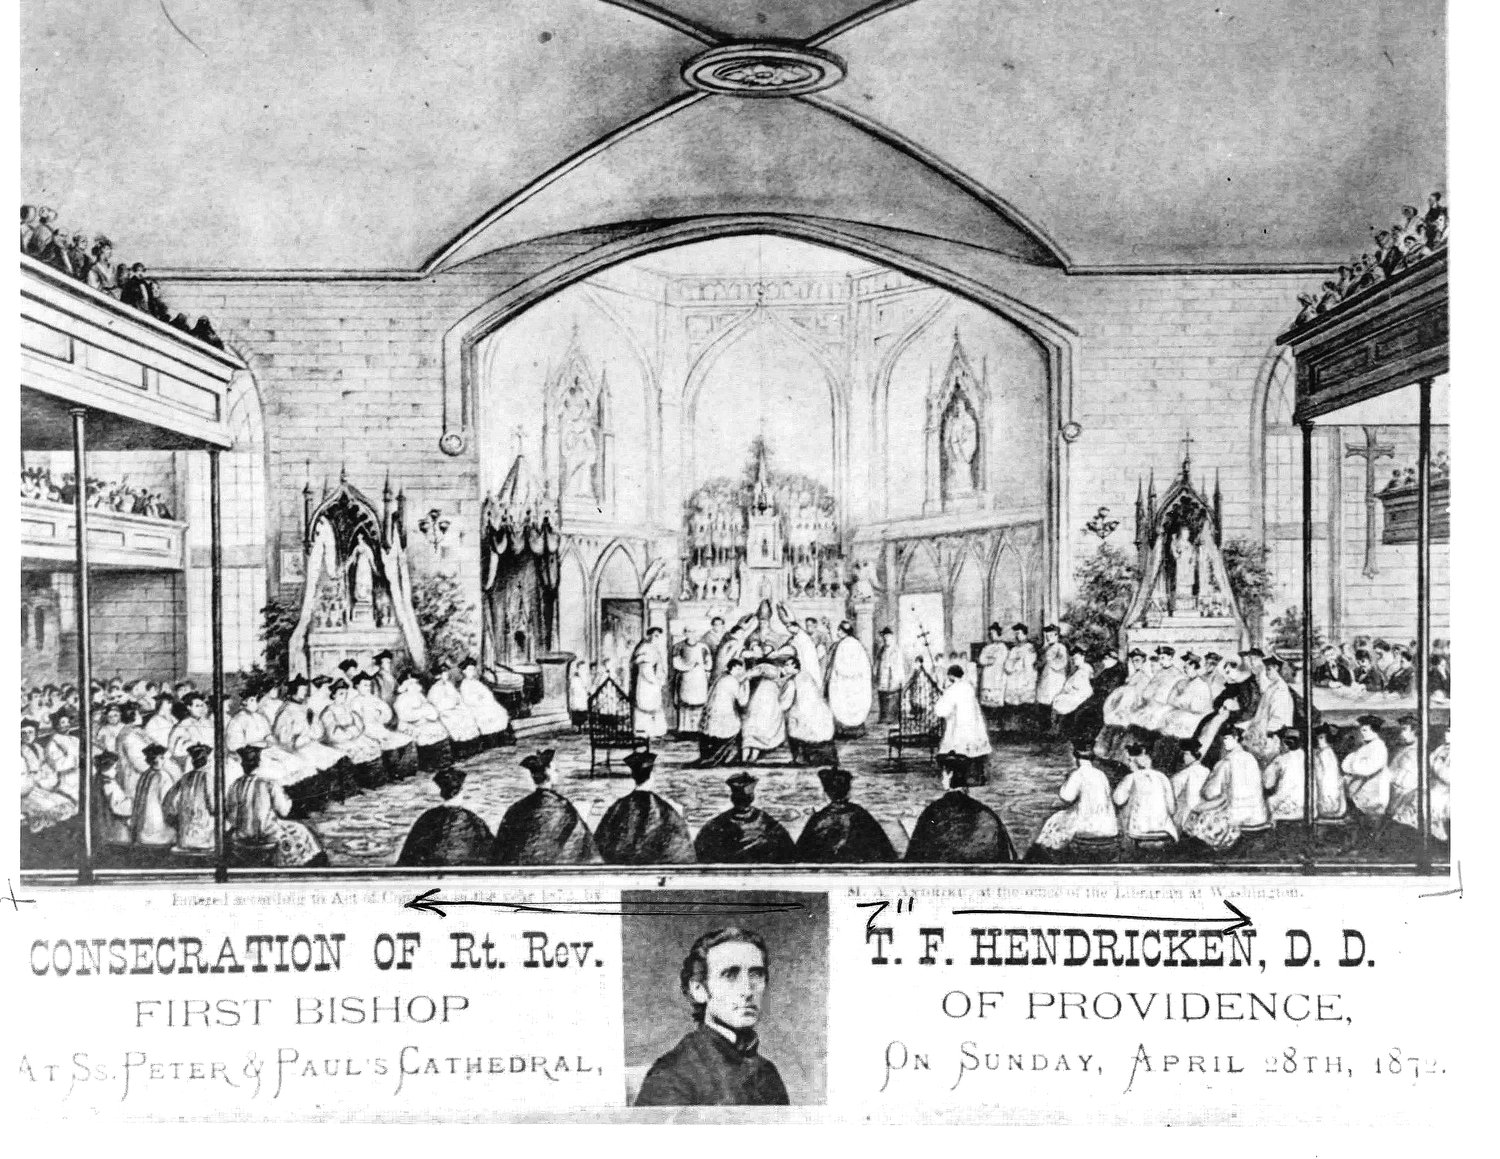 A postcard depicts the ordination of Thomas Francis Hendricken as Bishop of Providence, on April 27, 1872.